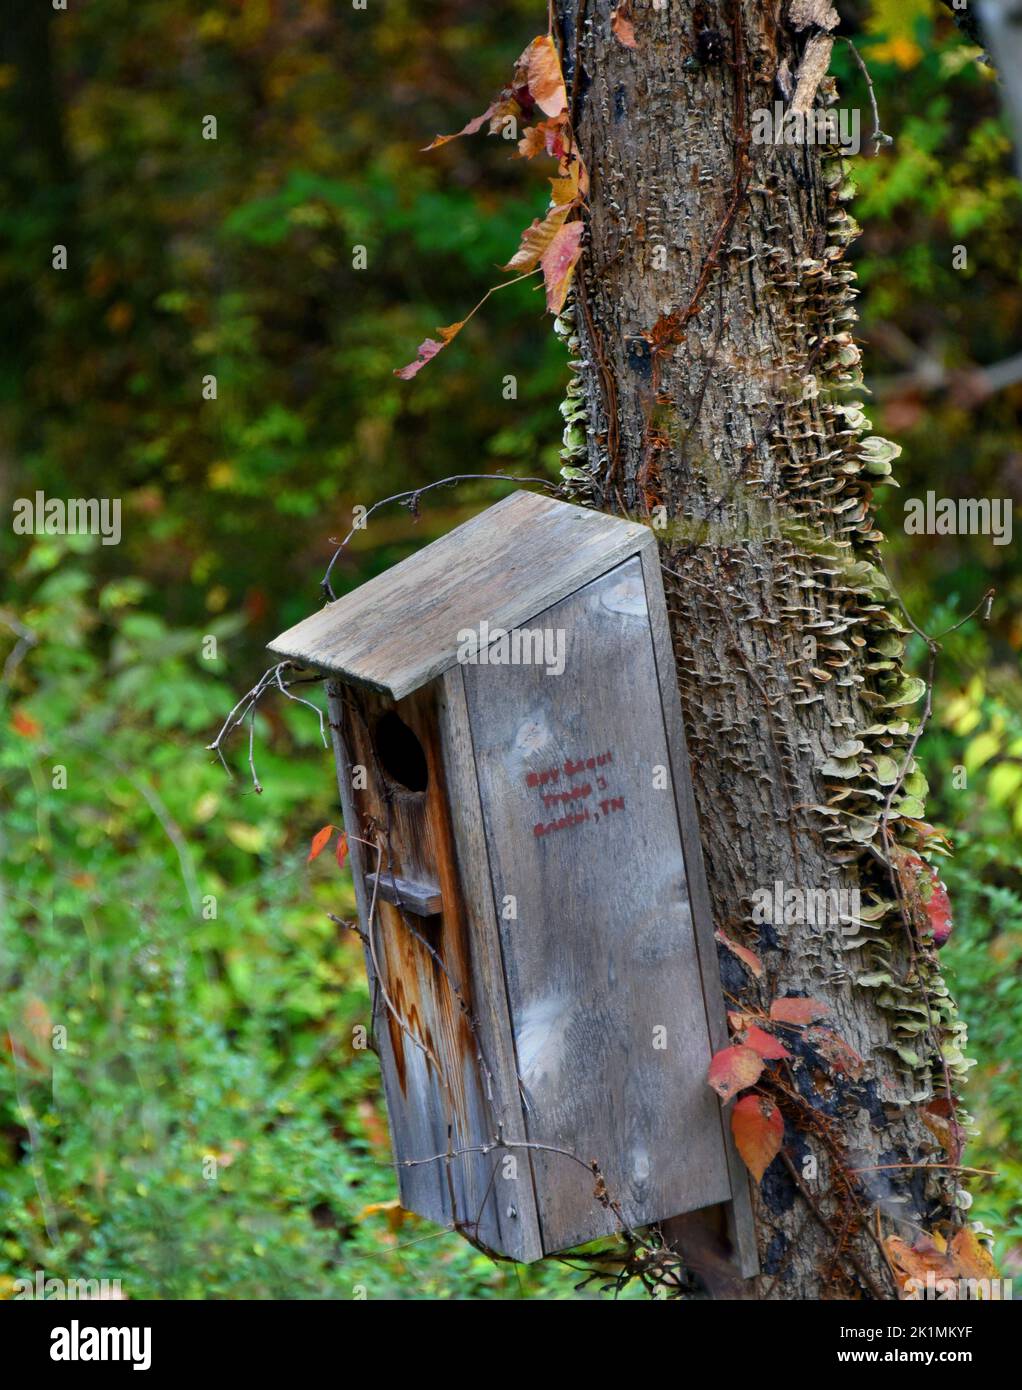 Boy Scouts built and hung bird house in Steele Creek Park in Bristol, Tennessee. Stock Photo